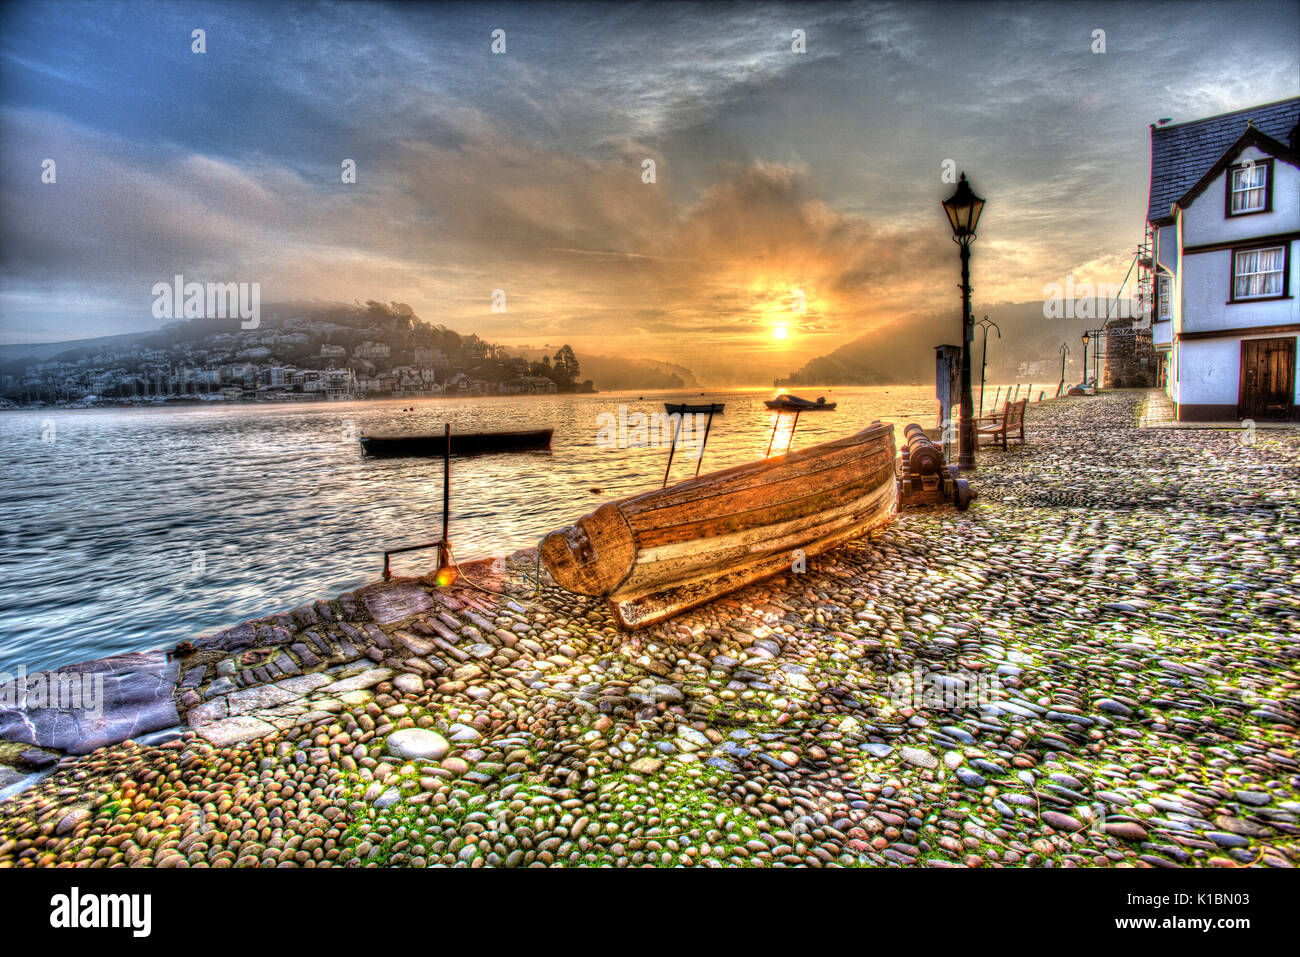 Town of Dartmouth, England. Picturesque morning view of Dartmouth’s historic Bayard’s Cove. Stock Photo